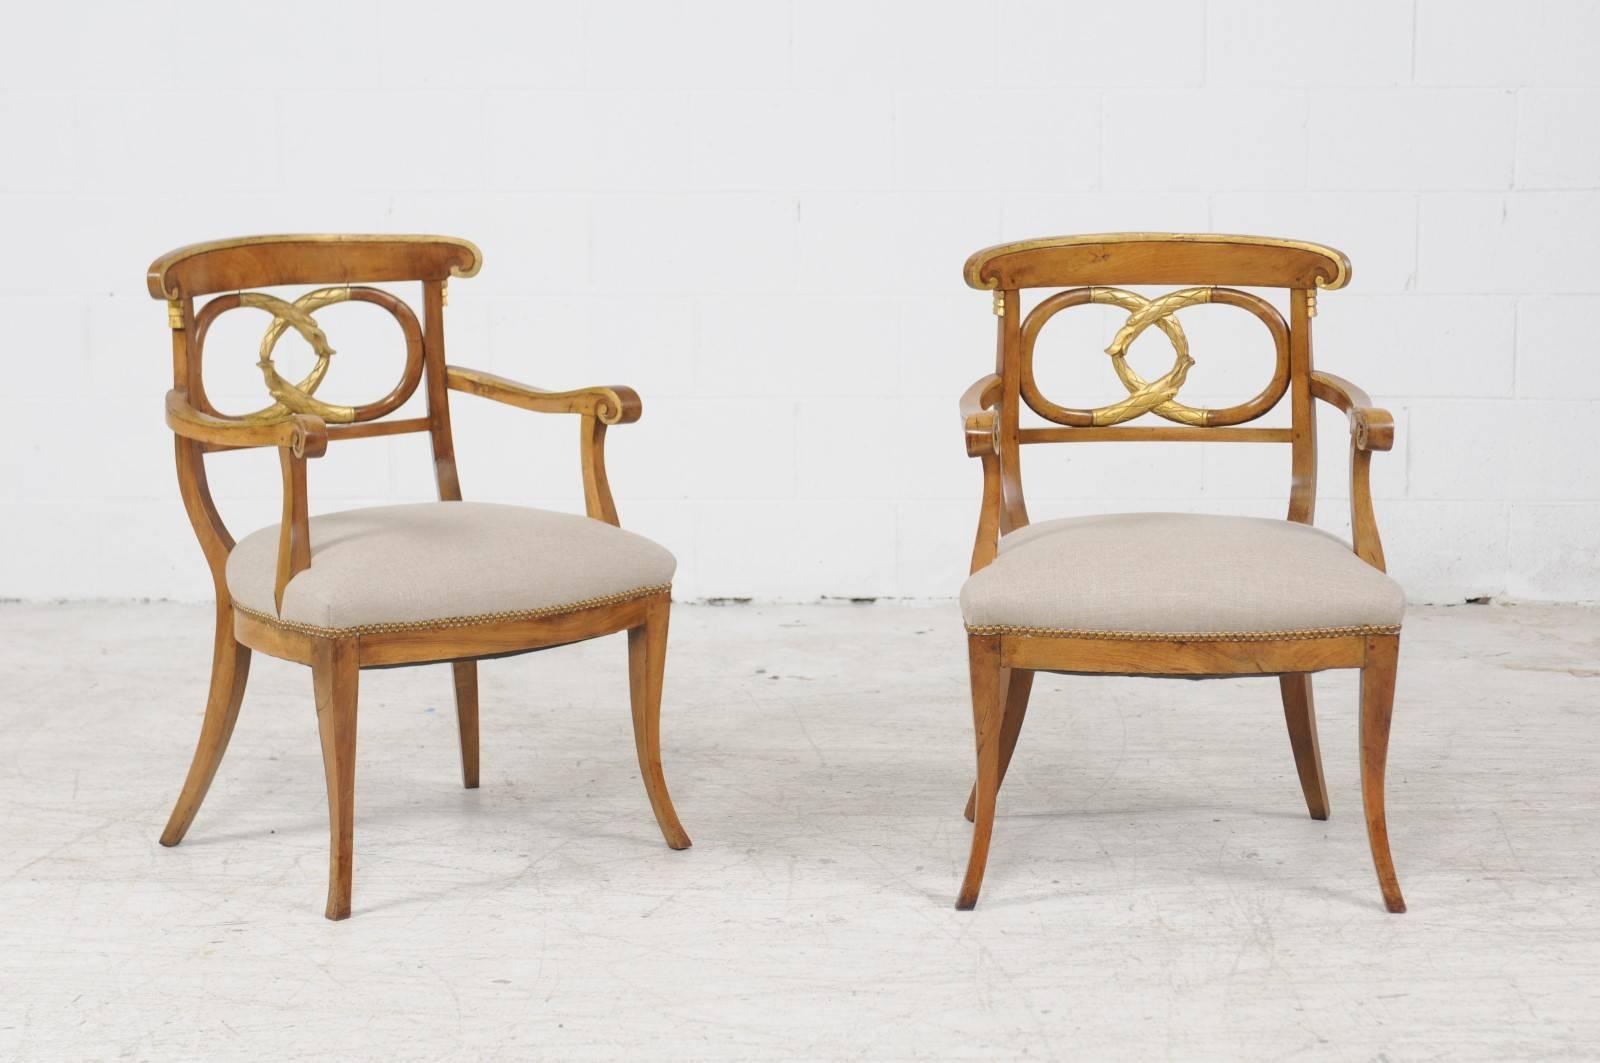 Pair of Italian 1860s Parcel-Gilt Walnut Upholstered Chairs with Serpent Motifs 1